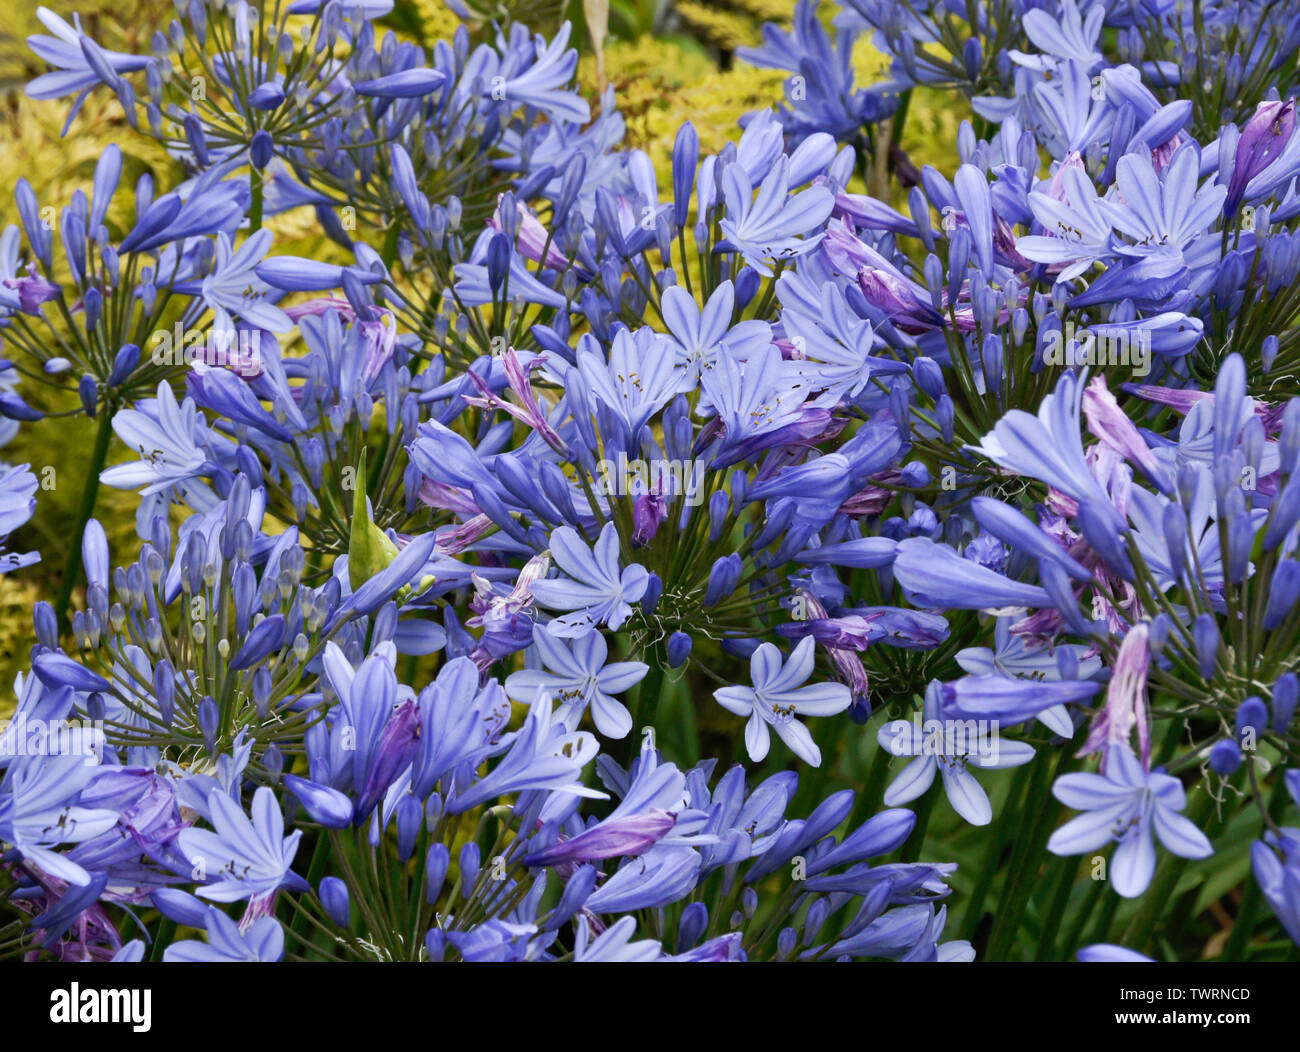 Blue agapanthus plant in bloom Stock Photo